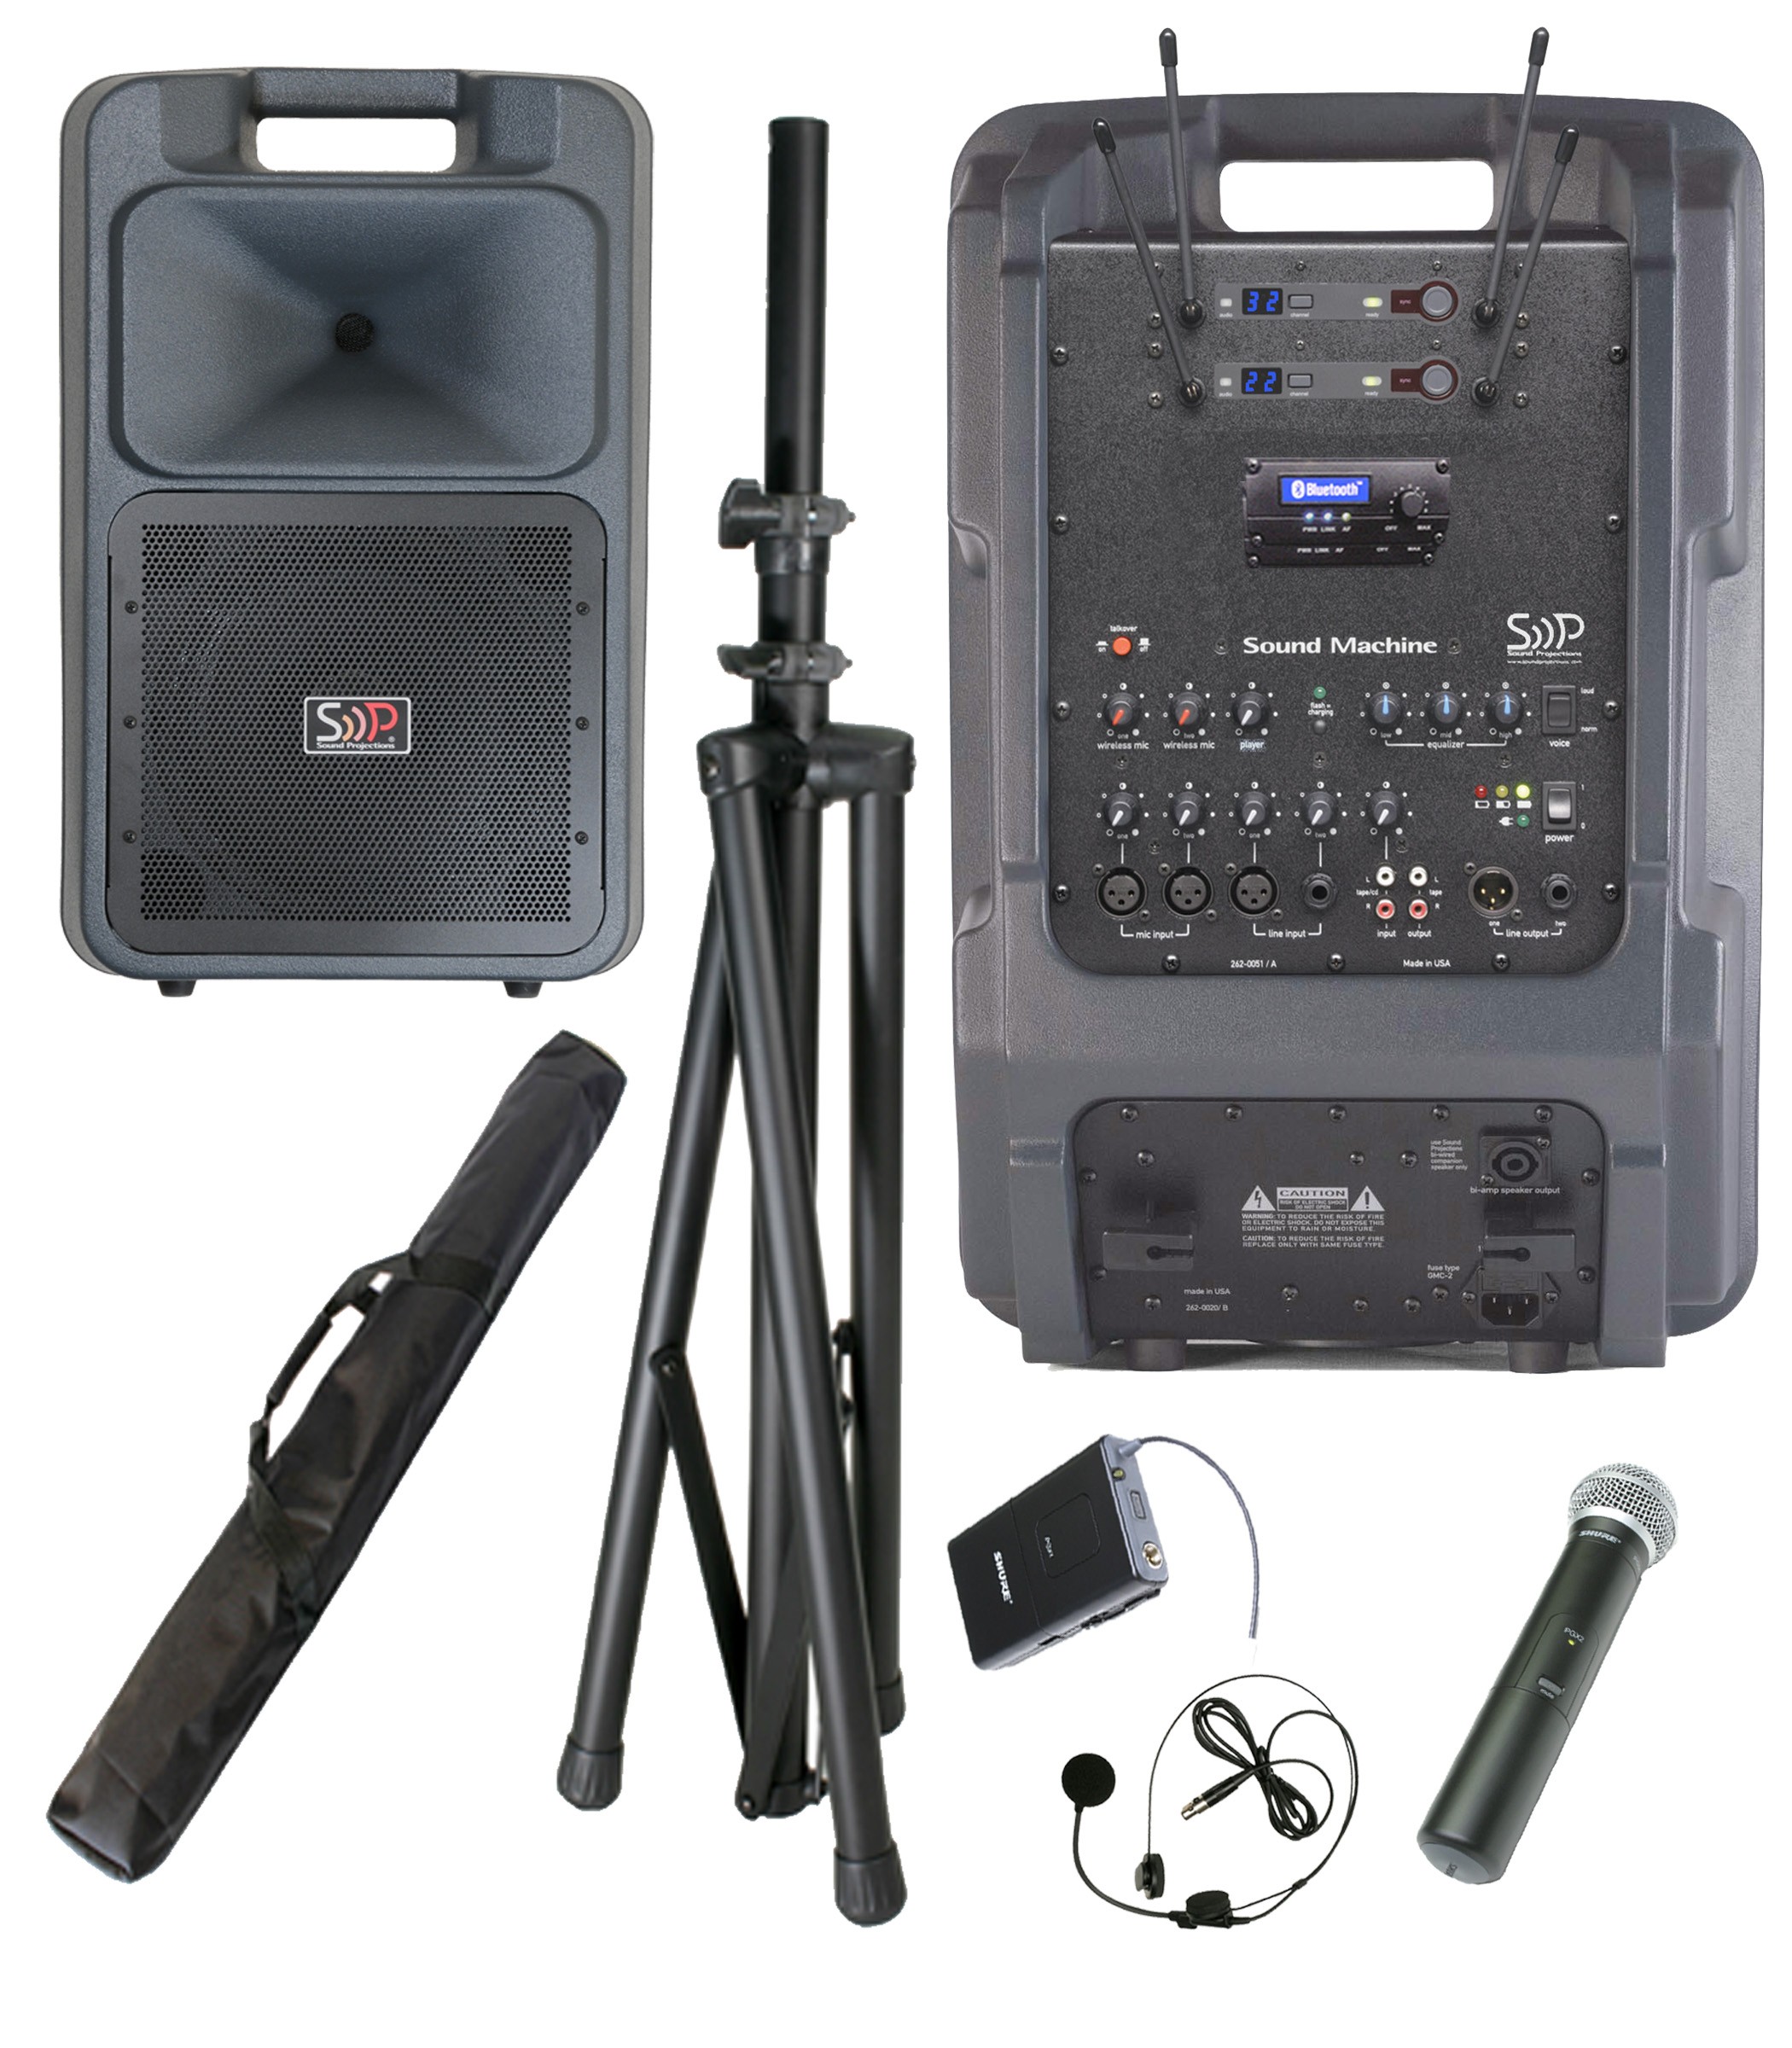 Sound Projections SM-5 60ch Digital Headset and Handheld Wireless OPT-600 pkg